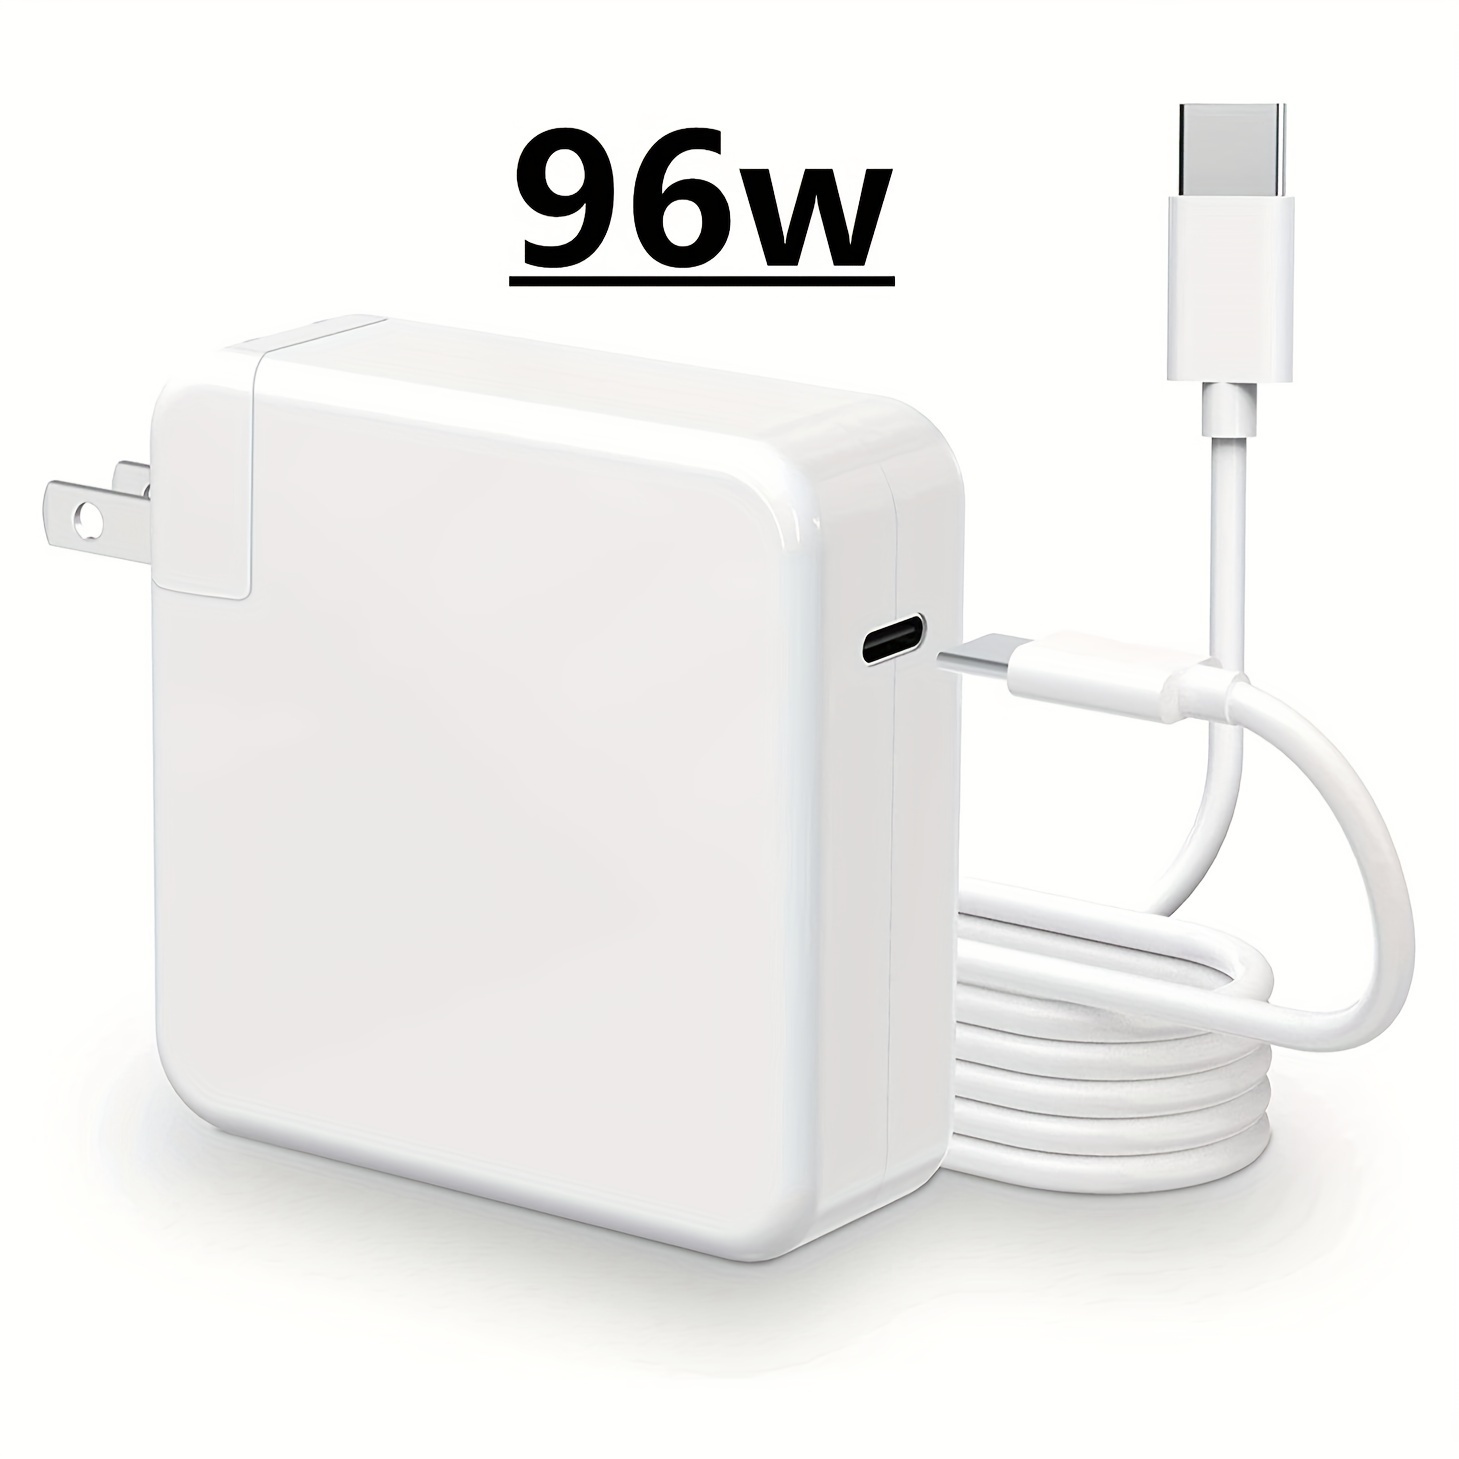 Mac Book Pro Charger - 96W USB C Charger Fast Charger for USB C Port  MacBook pro & MacBook Air, ipad Pro, Samsung Galaxy and All USB C Device,  6.6 ft